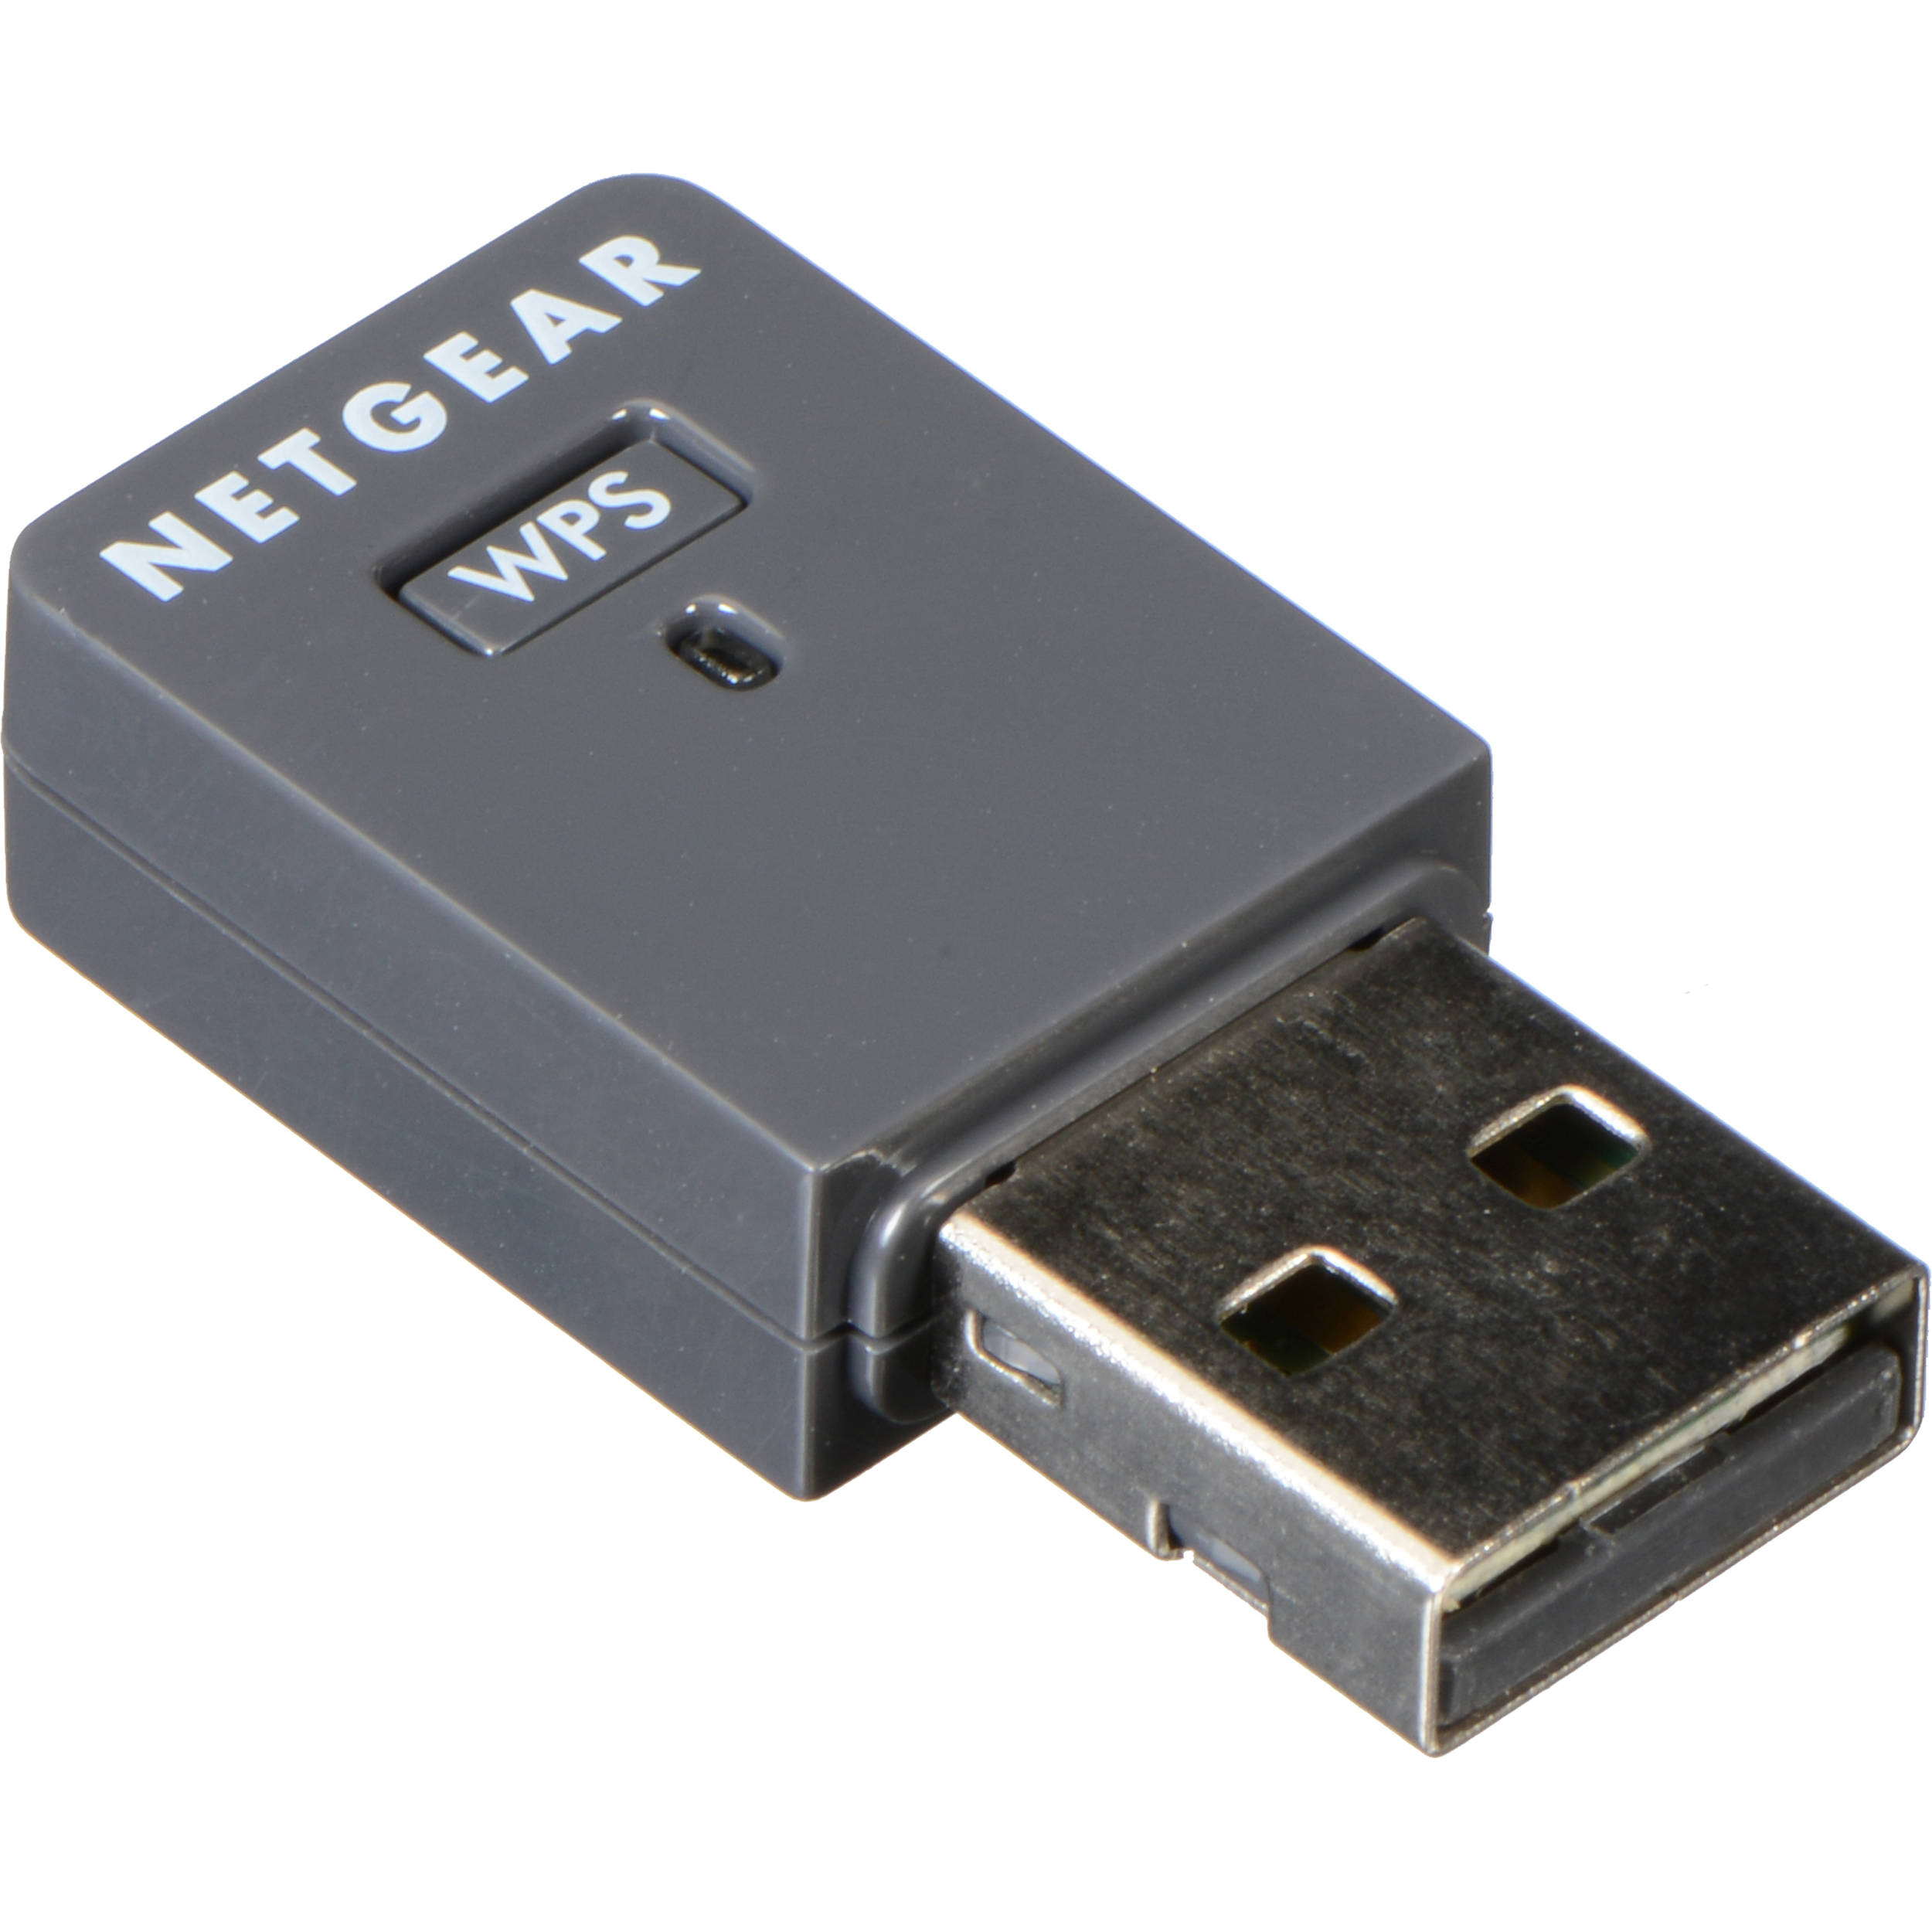 What Does A Usb Wifi Adapter Do